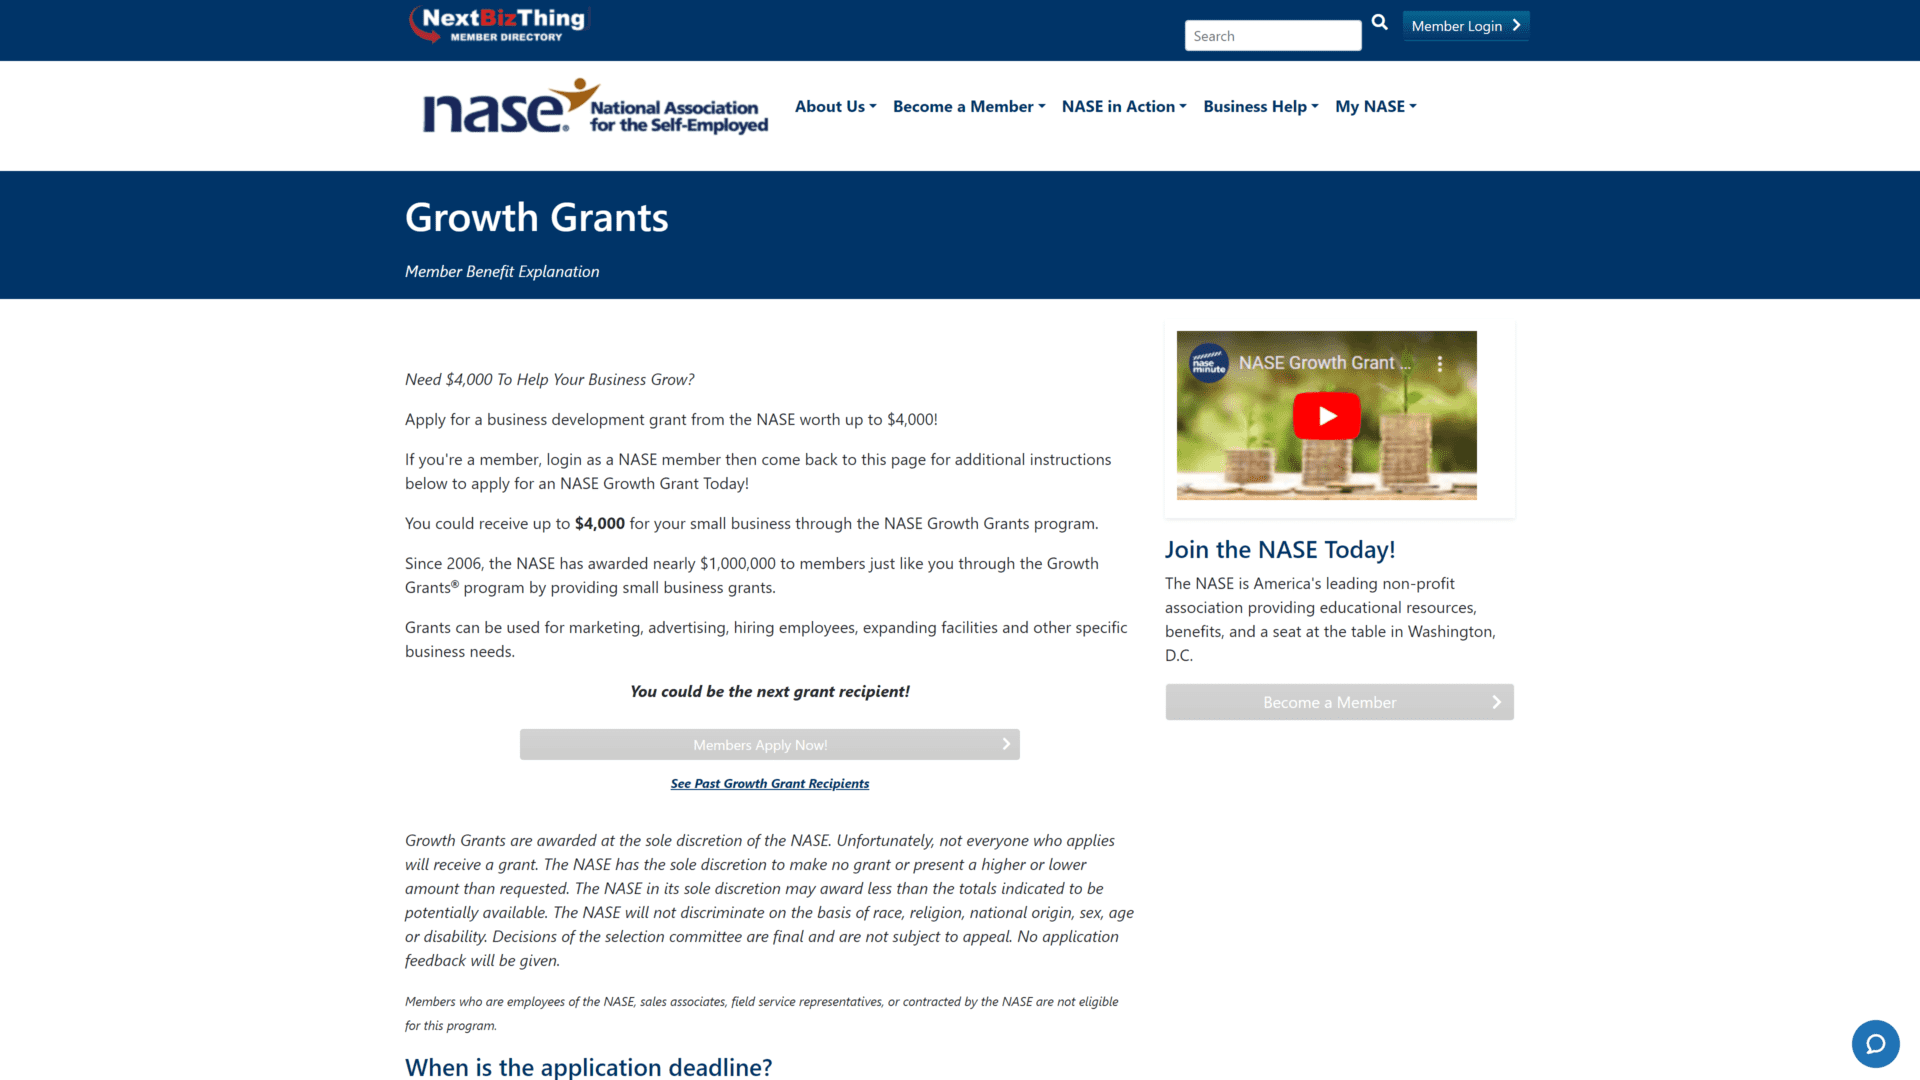 screenshot of the national association for the self employed NASE homepage